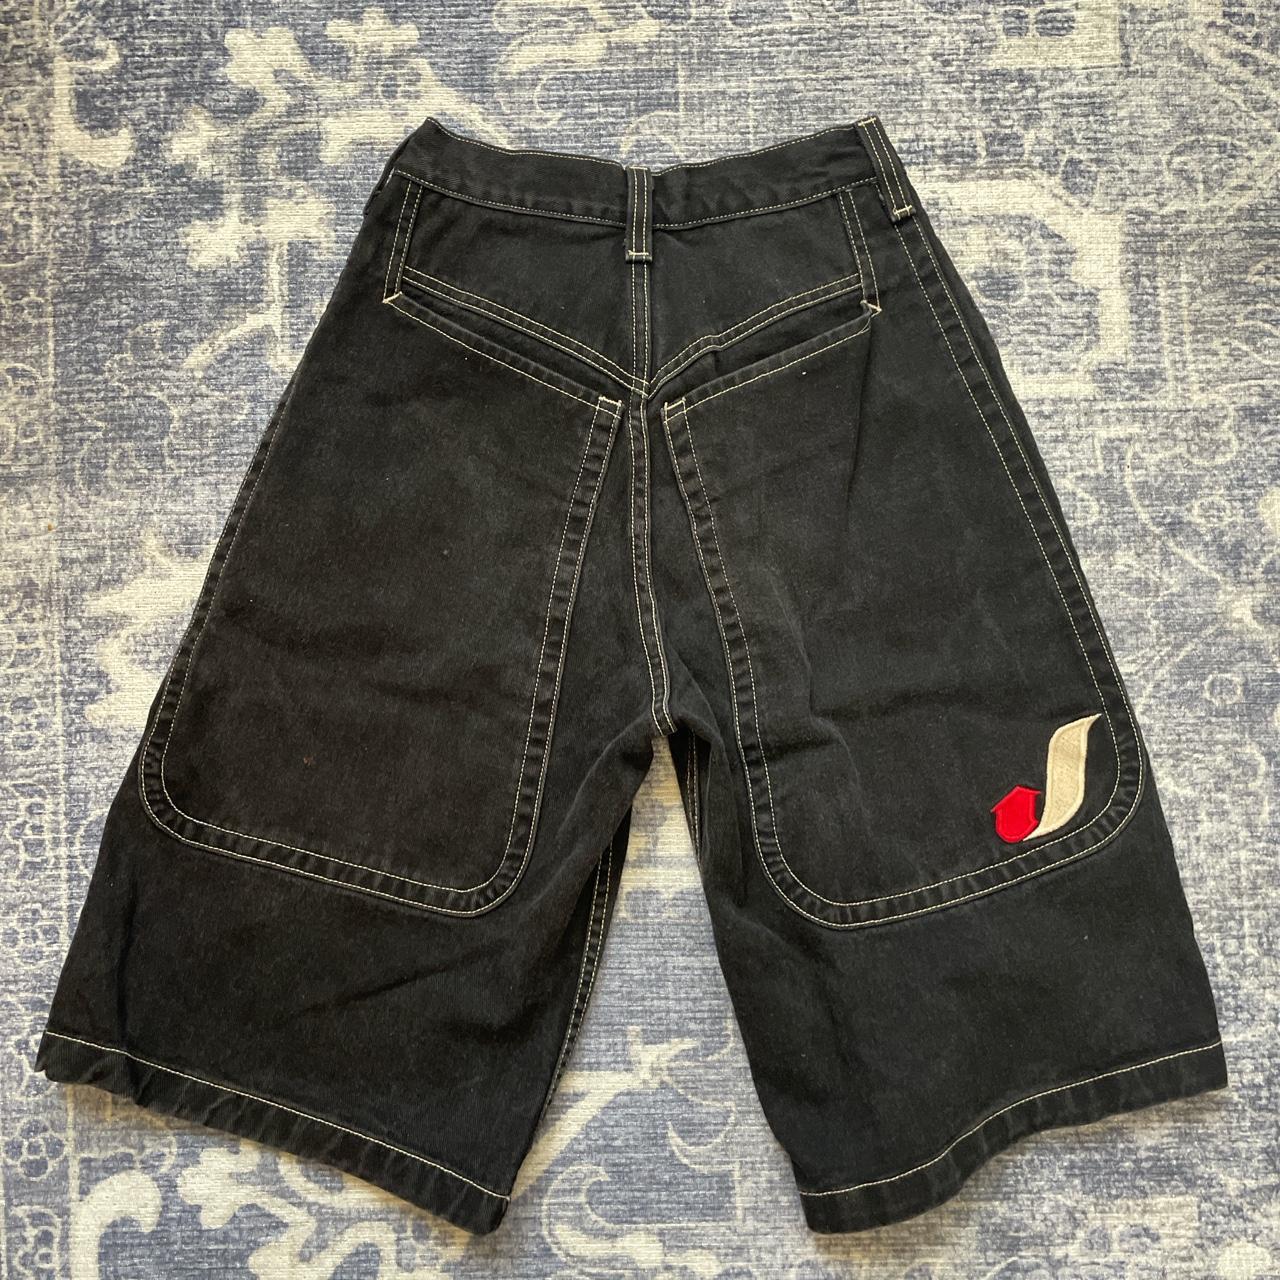 JNCO Spy J2111 90's Jorts Baggy Size 28 Made in the... - Depop